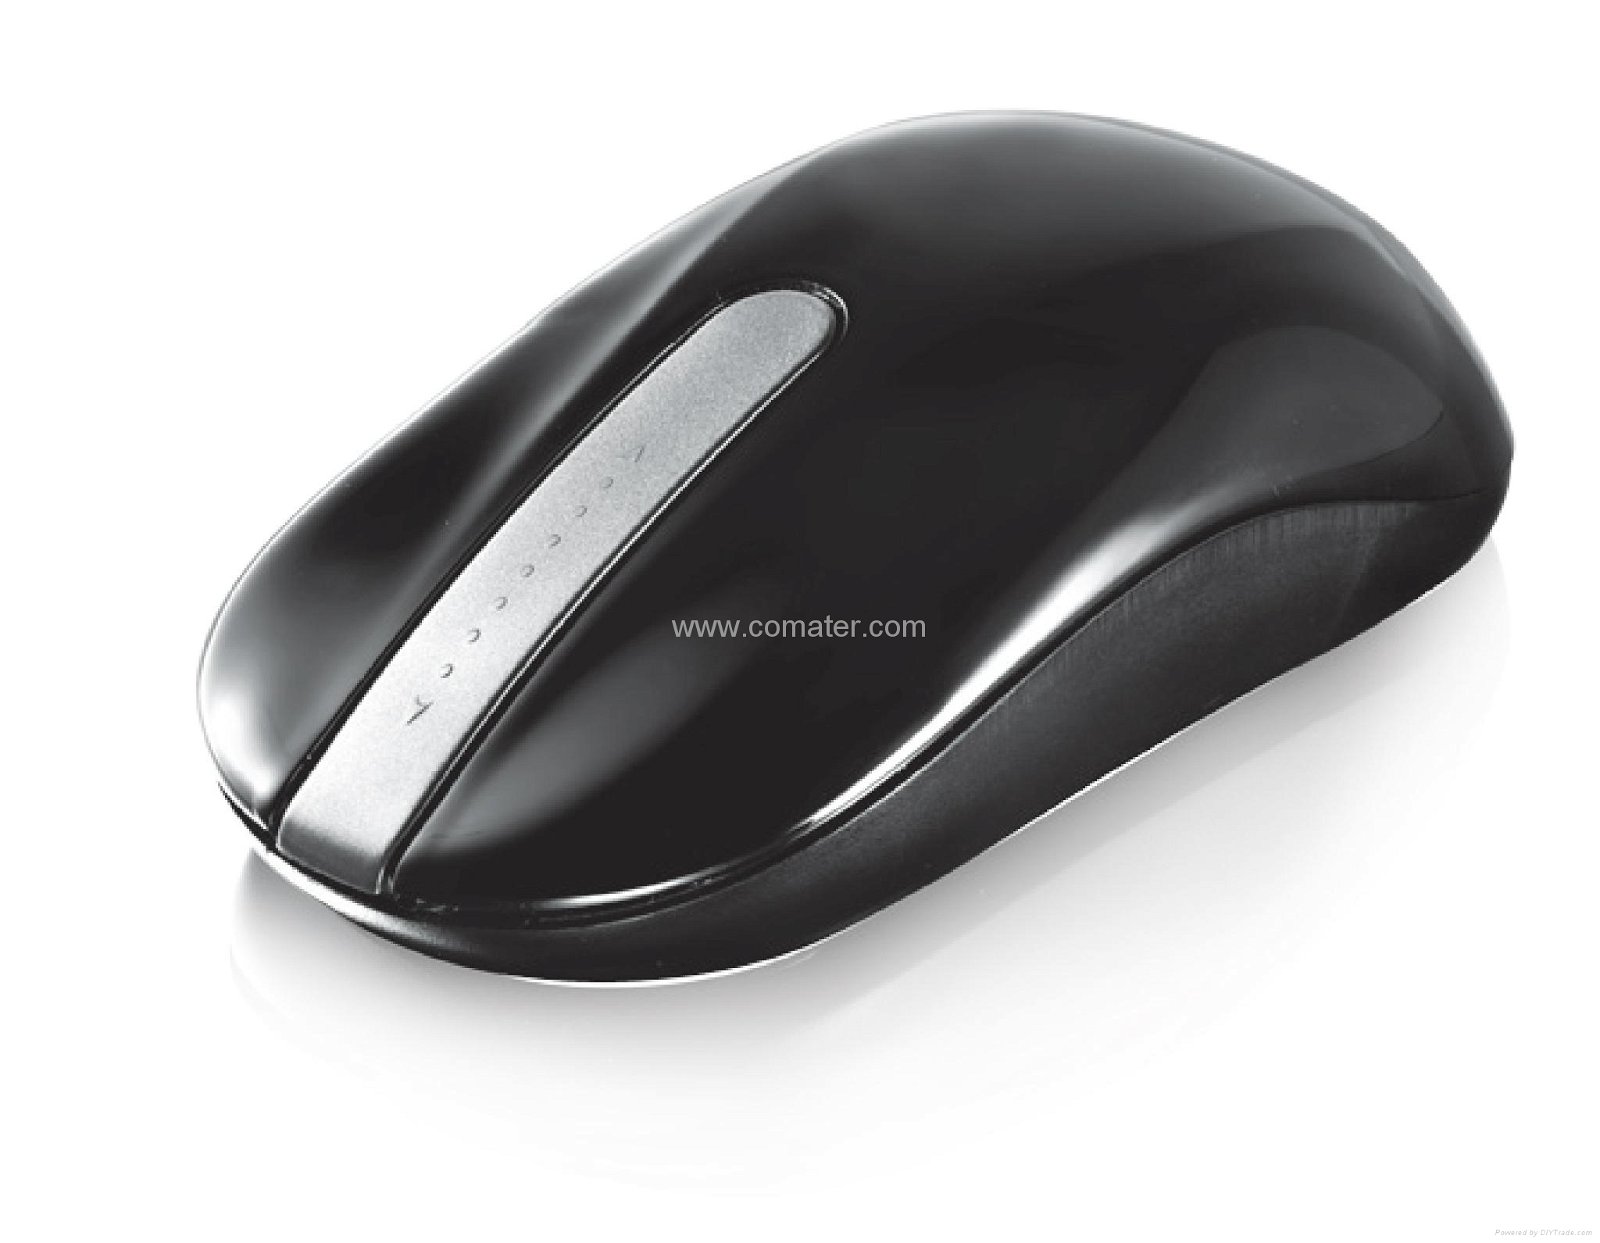 Amazing! wireless touch computer mouse